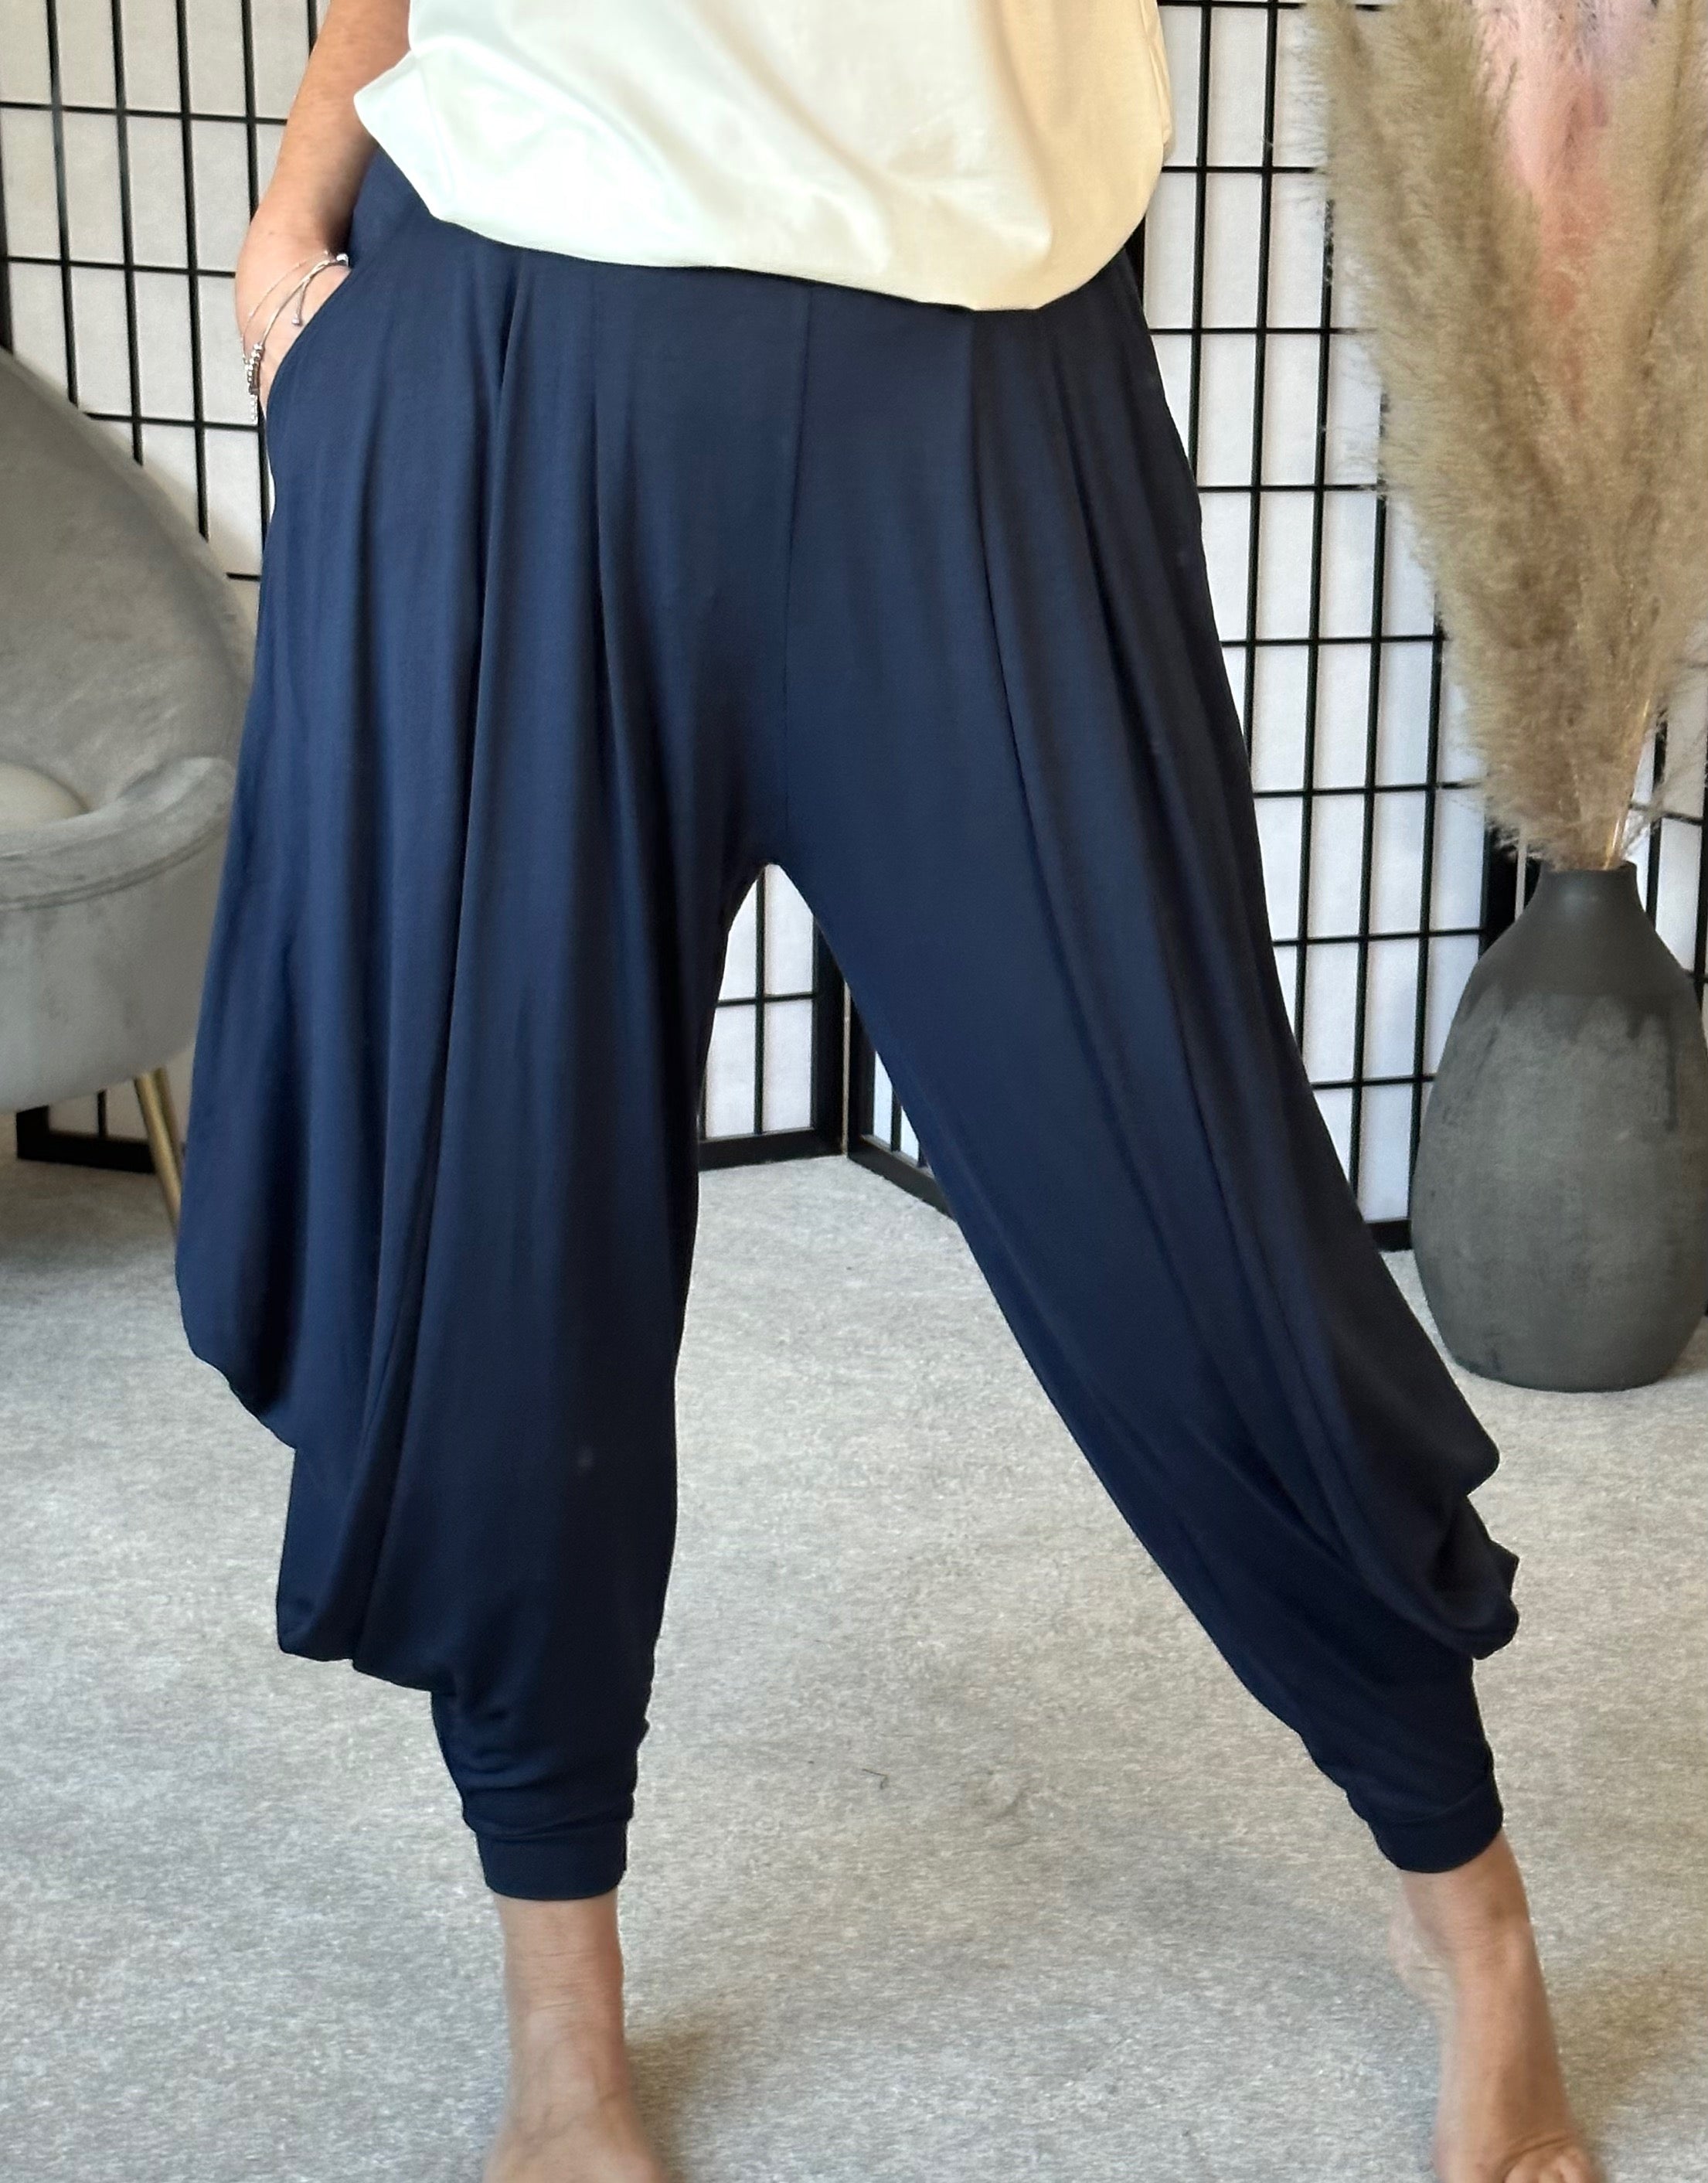 Bounty Hunter Unisex Harem Pant  STAND OUT